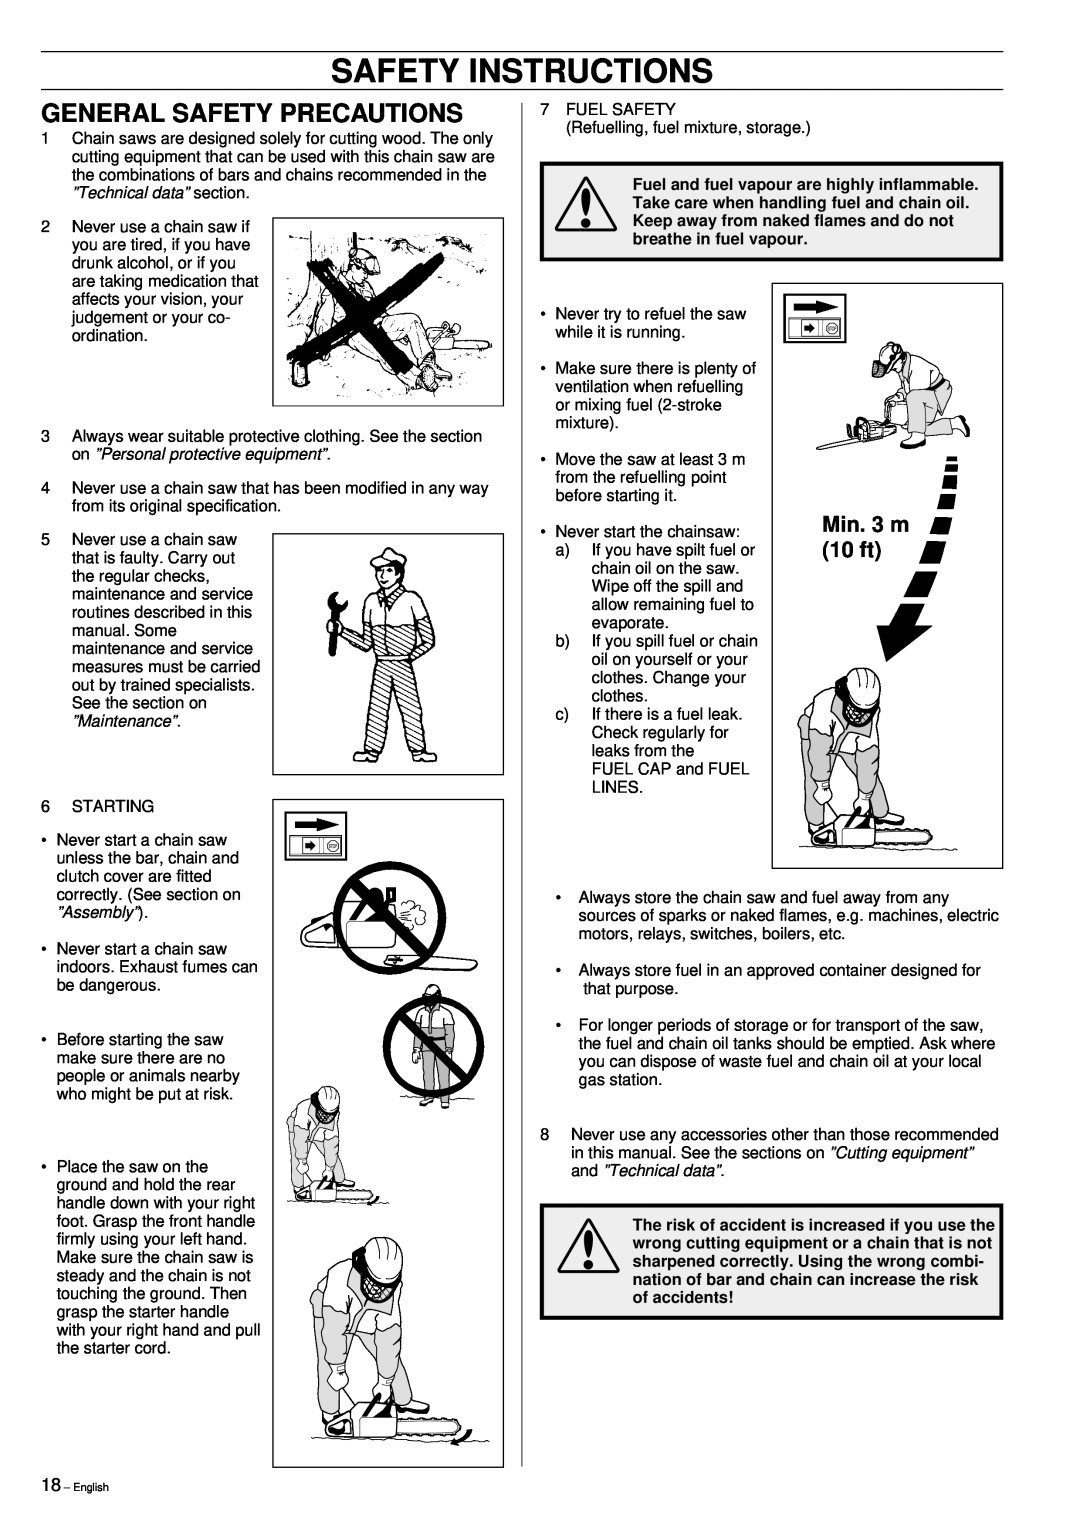 Husqvarna 395XP manual Safety Instructions, Min. 3 m, 10 ft, ”Technical data” section, on ”Personal protective equipment” 